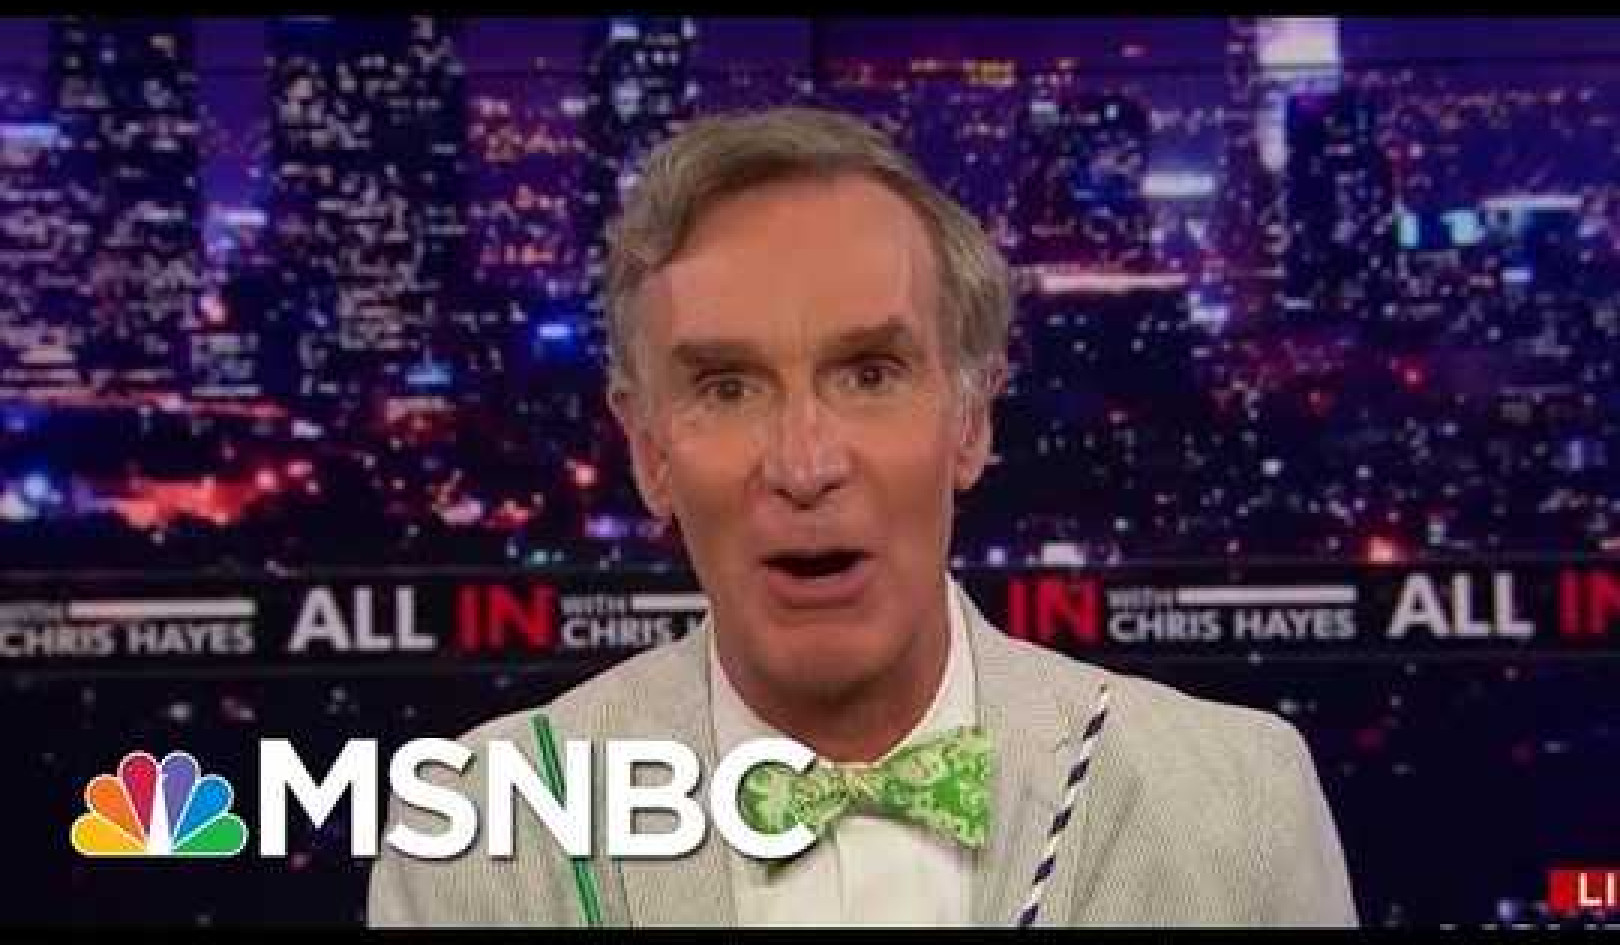 Bill Nye And The Climate Crisis